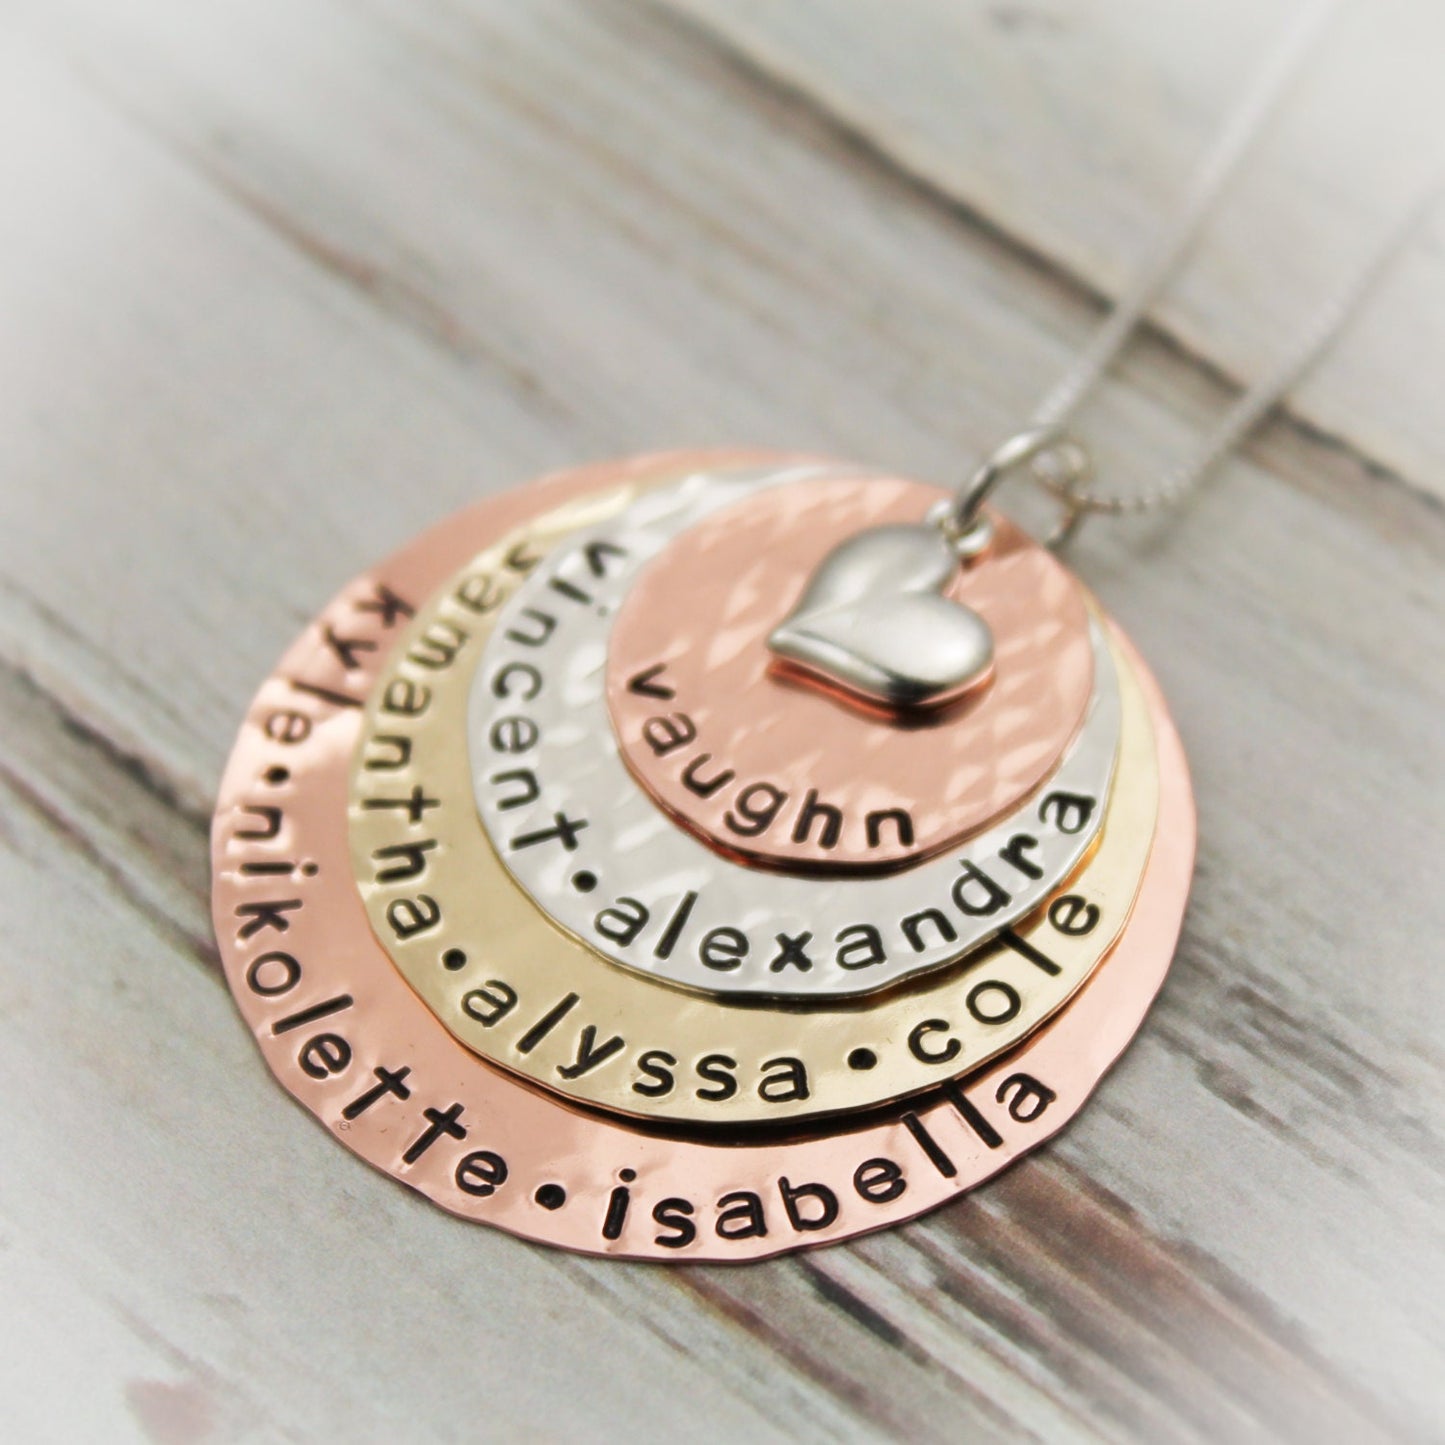 Grandmother Layered Mixed Metals Necklace Personalized Hand Stamped Jewelry